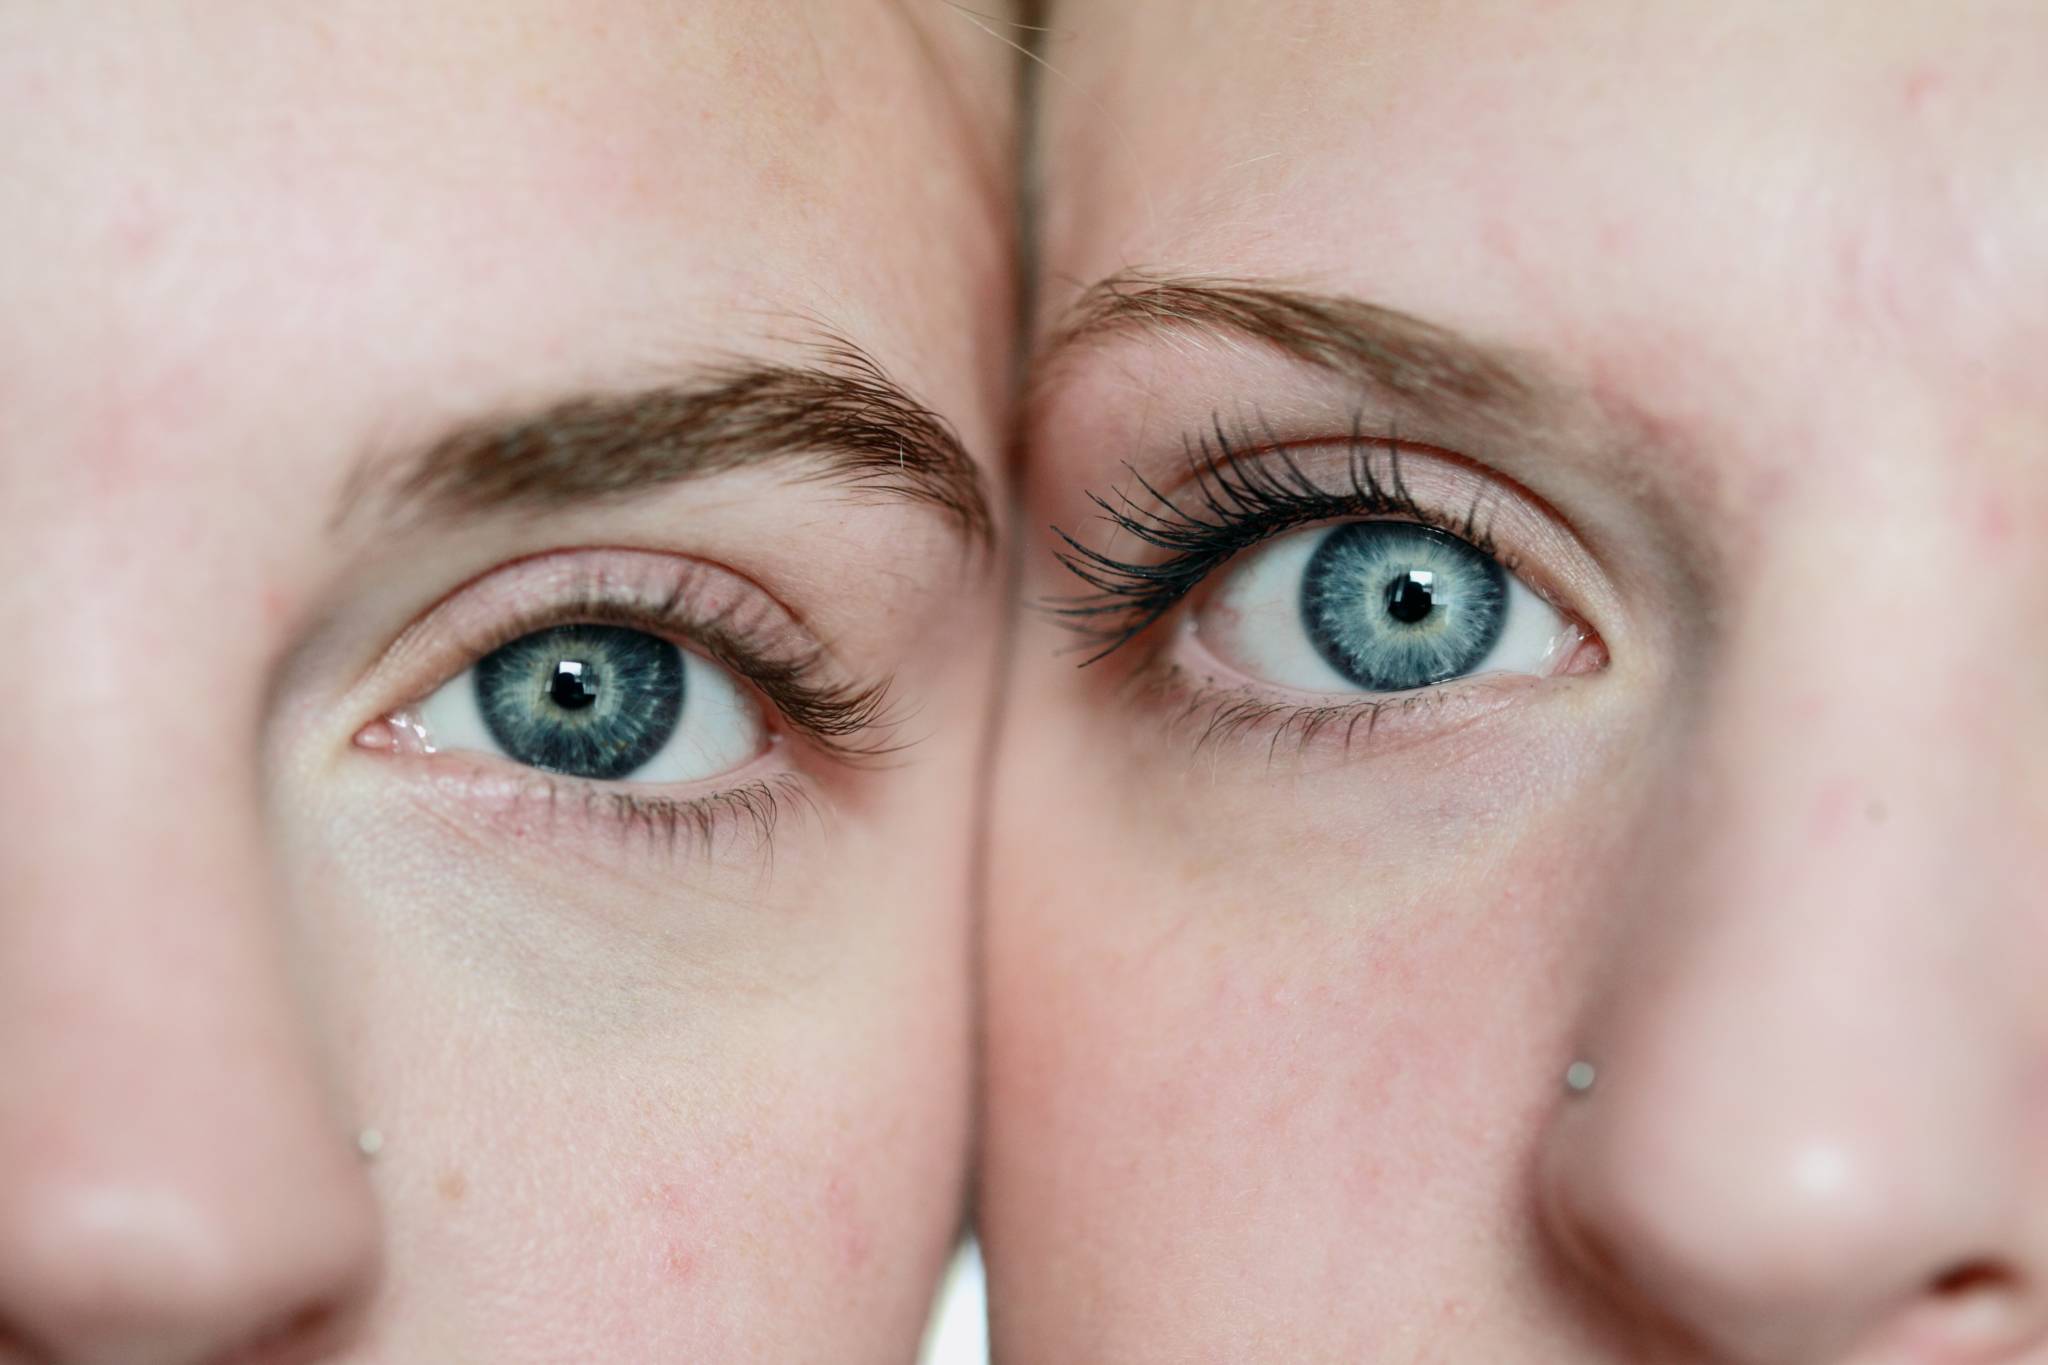 close up on eyes, eyebrows, and nose of two caucasian women with blue eyes